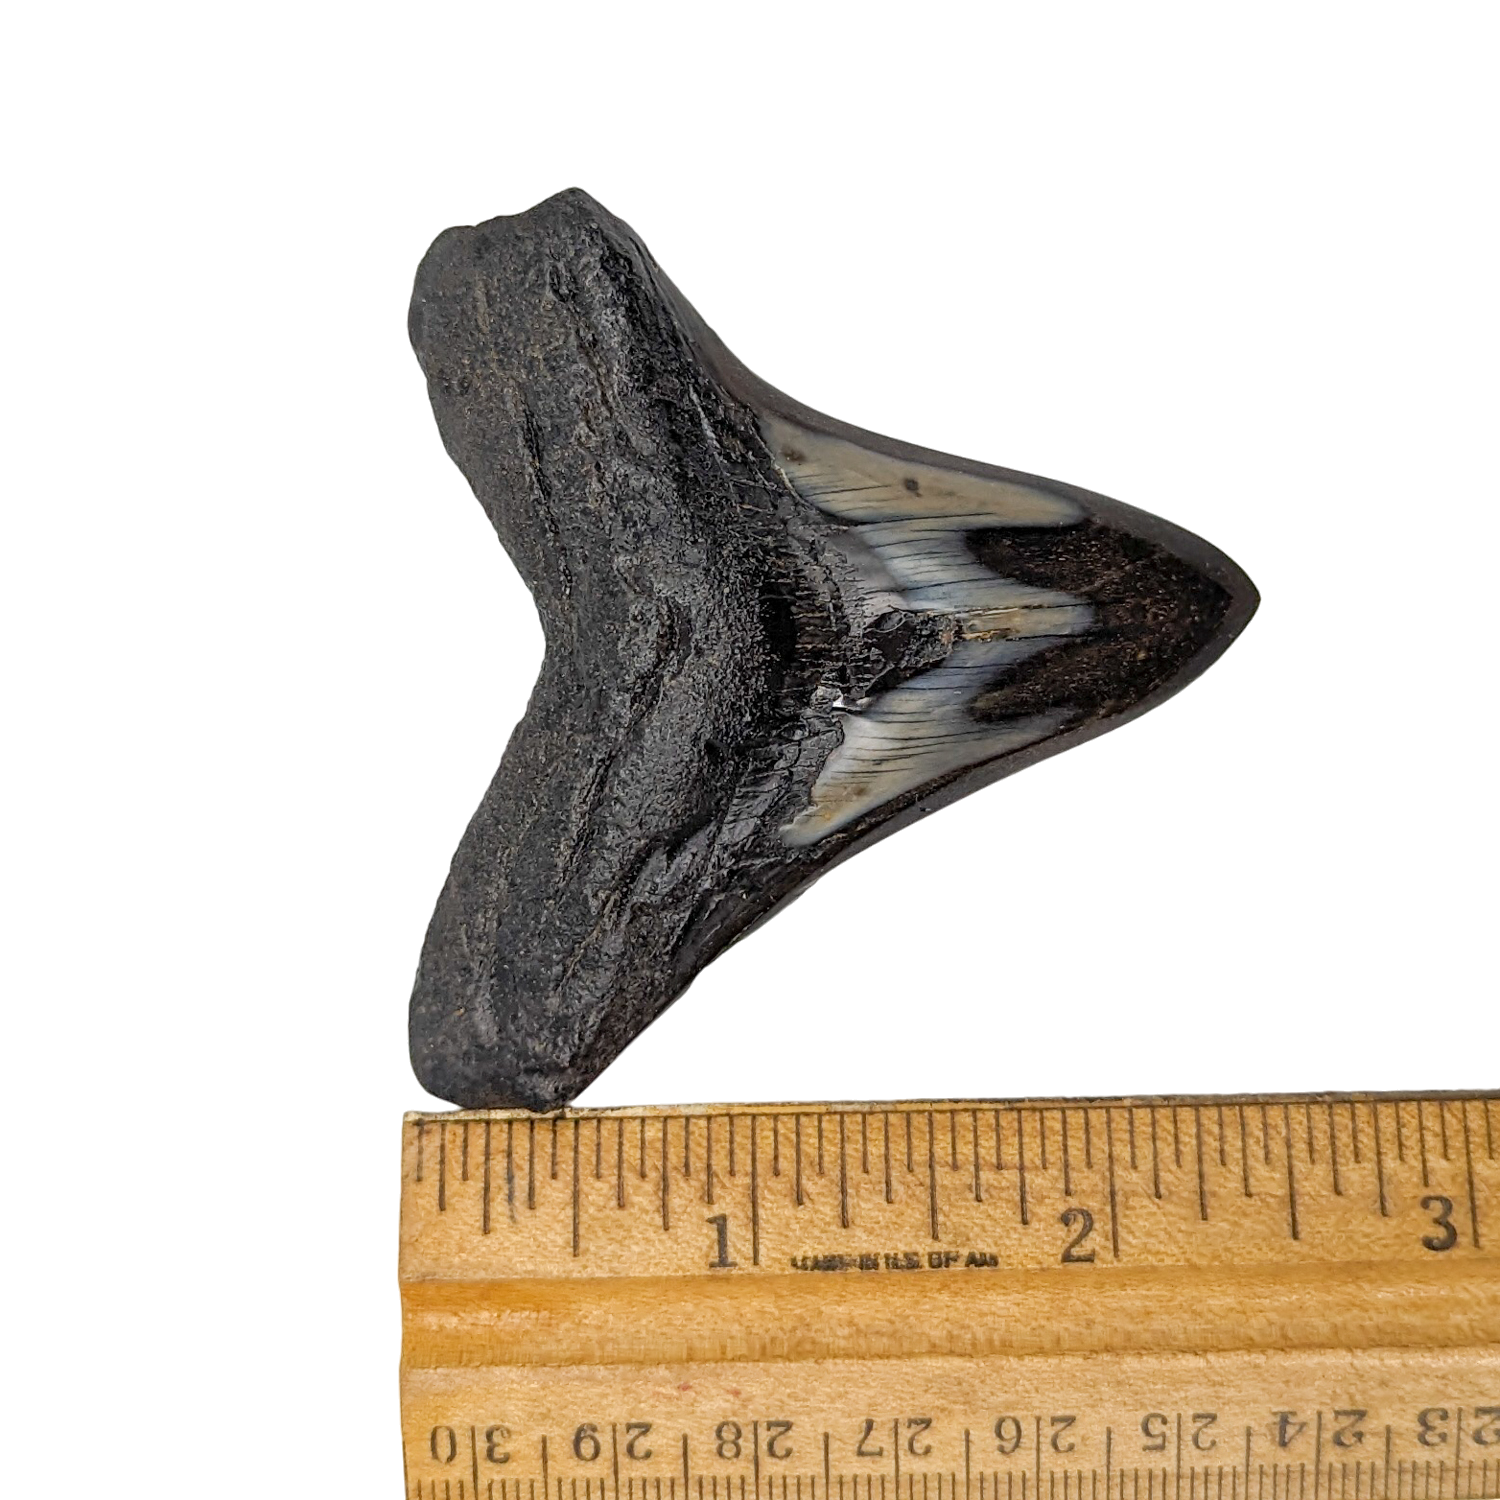 Authentic 2 7/16" Megalodon Shark Tooth Fossil